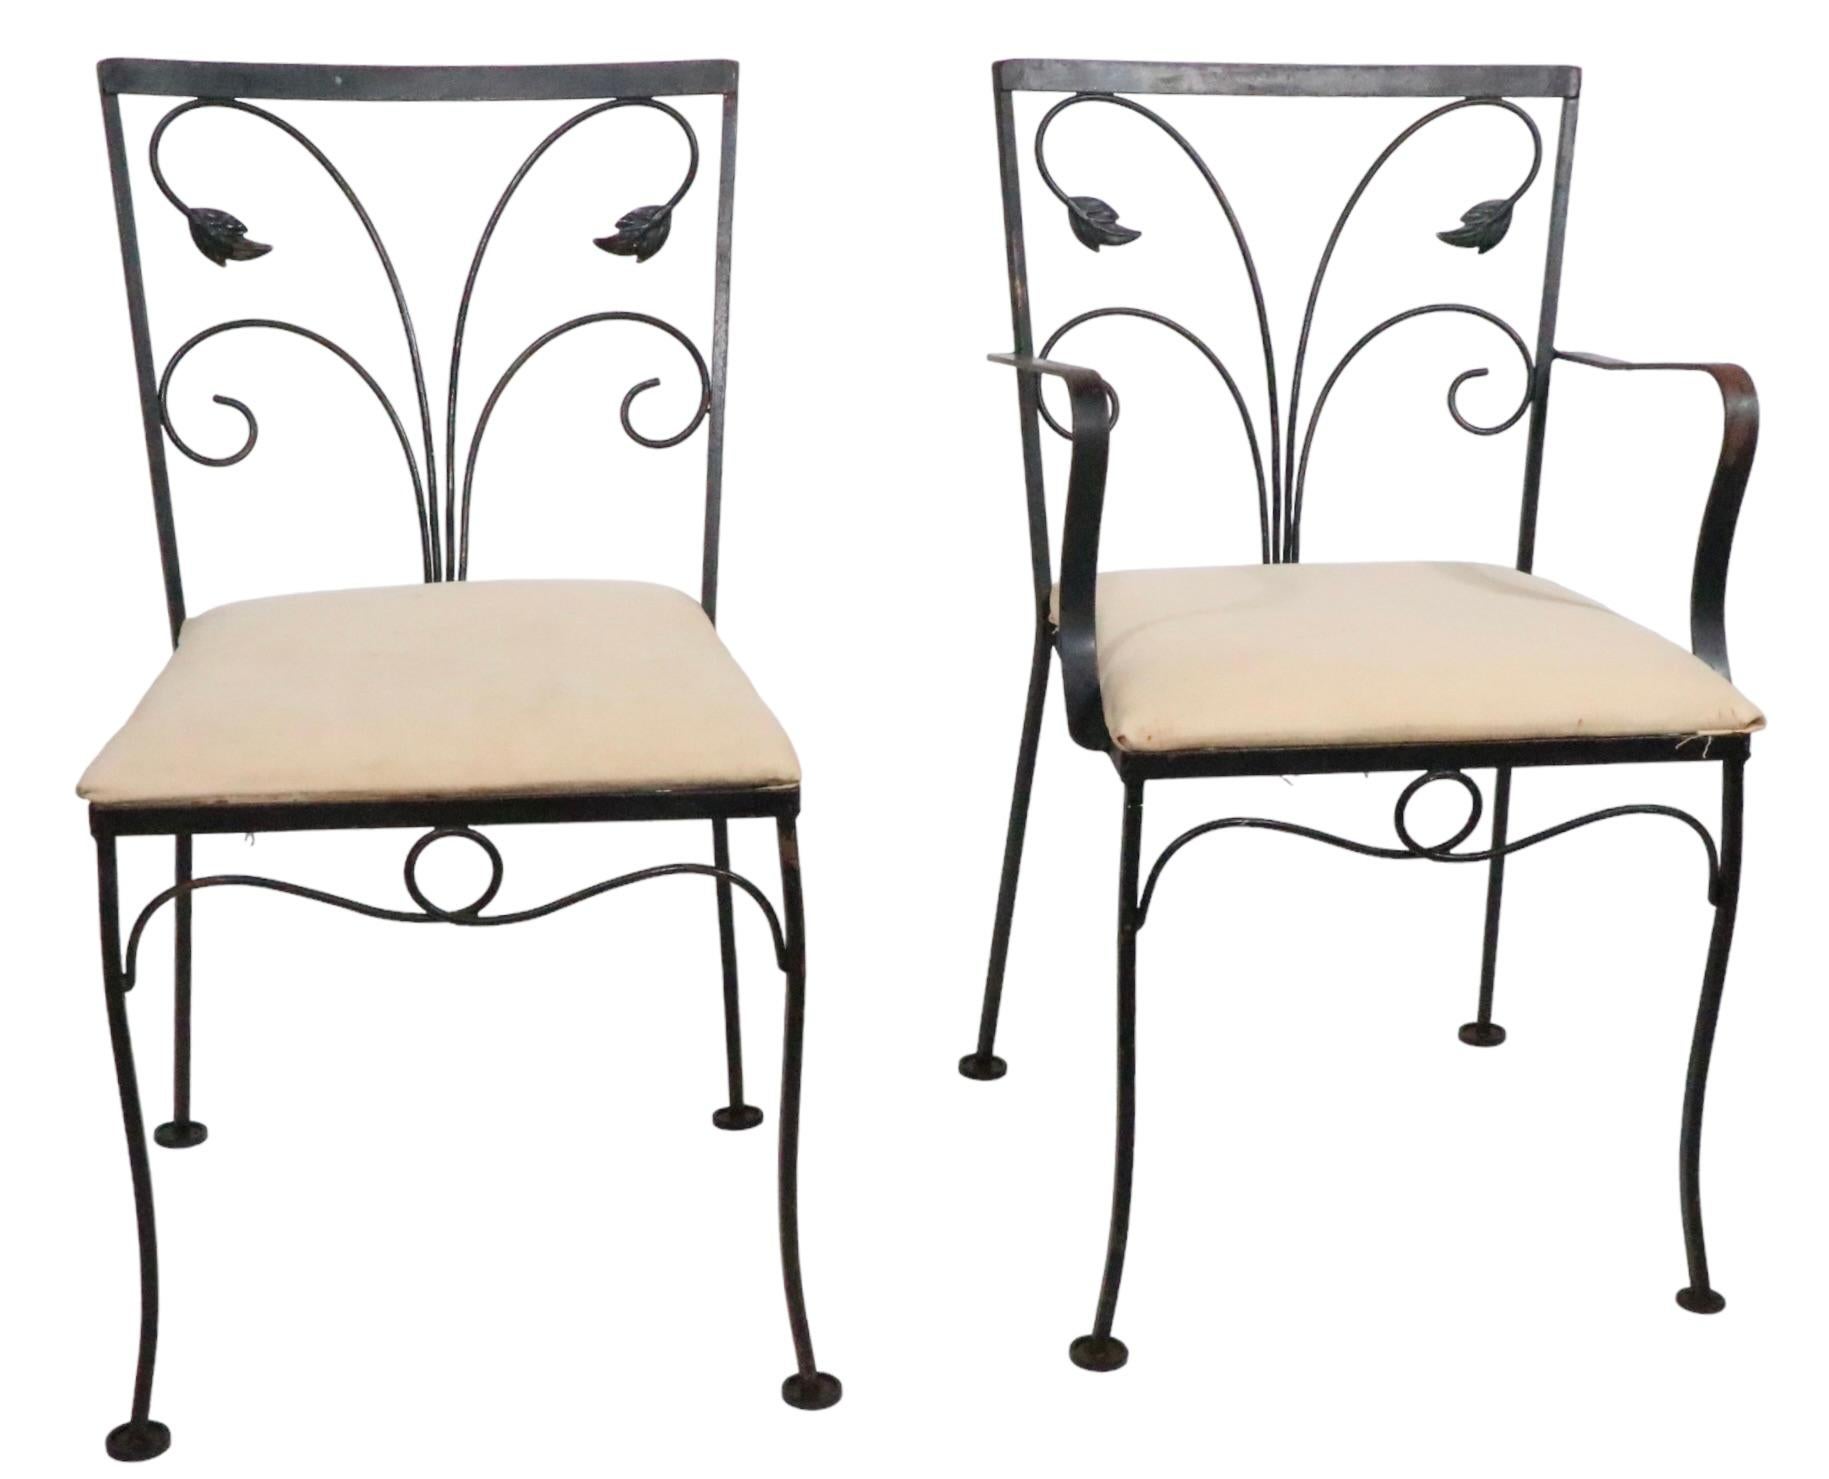 5pc. Wrought Iron and Glass Garden Patio Set att. to Salterini For Sale 9